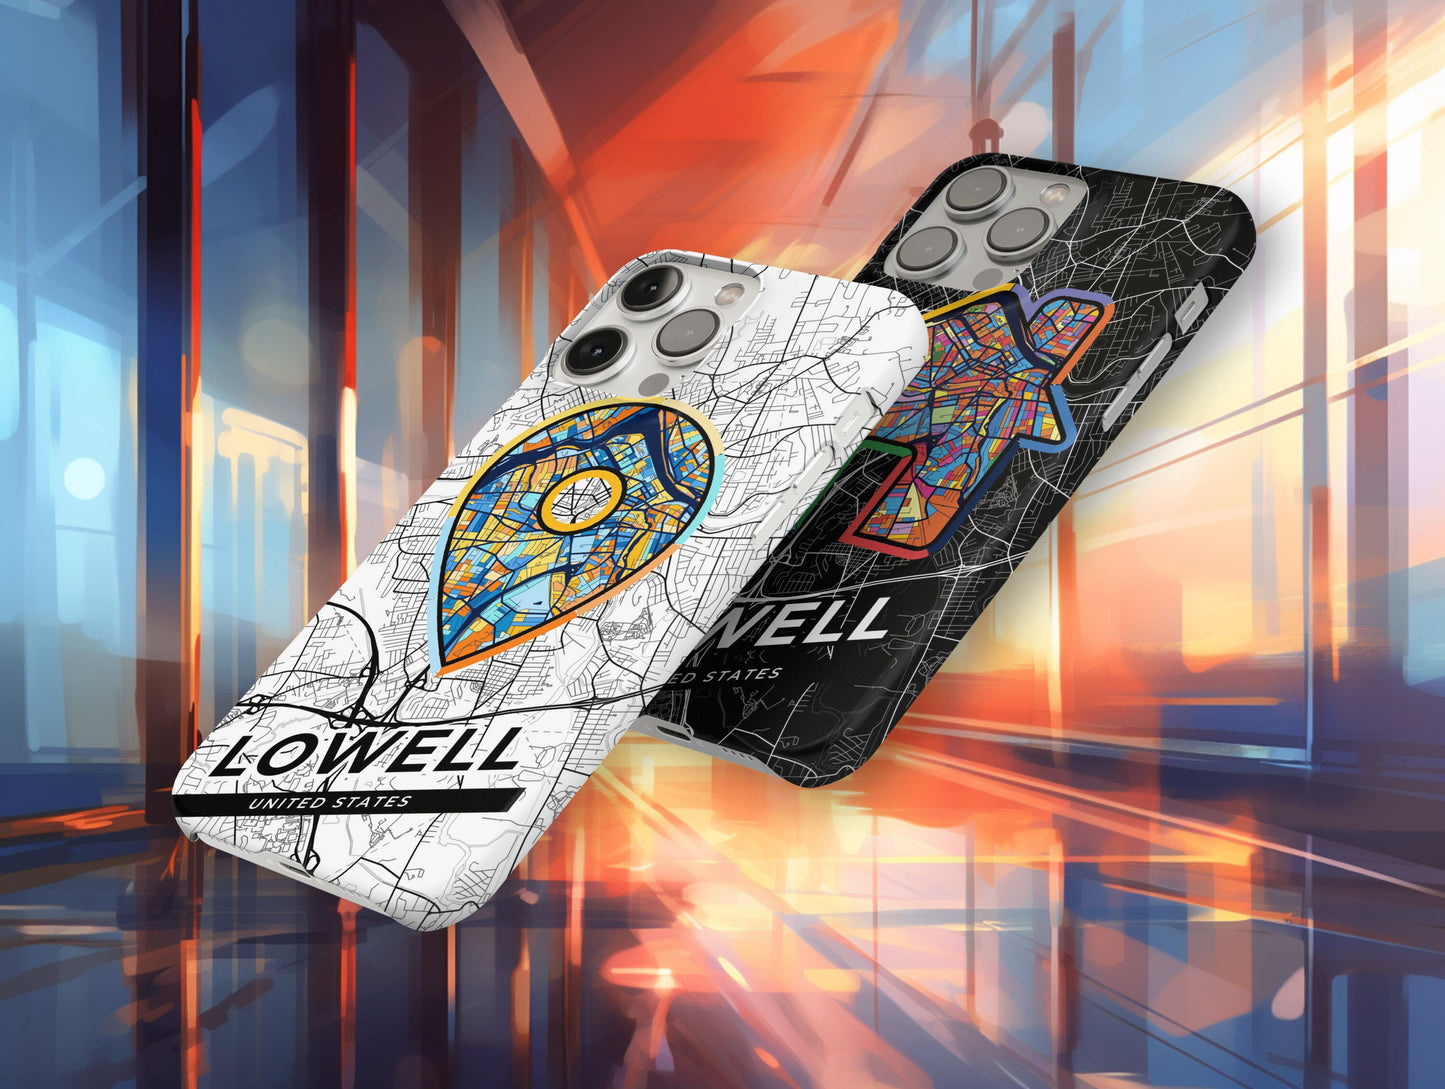 Lowell Massachusetts slim phone case with colorful icon. Birthday, wedding or housewarming gift. Couple match cases.